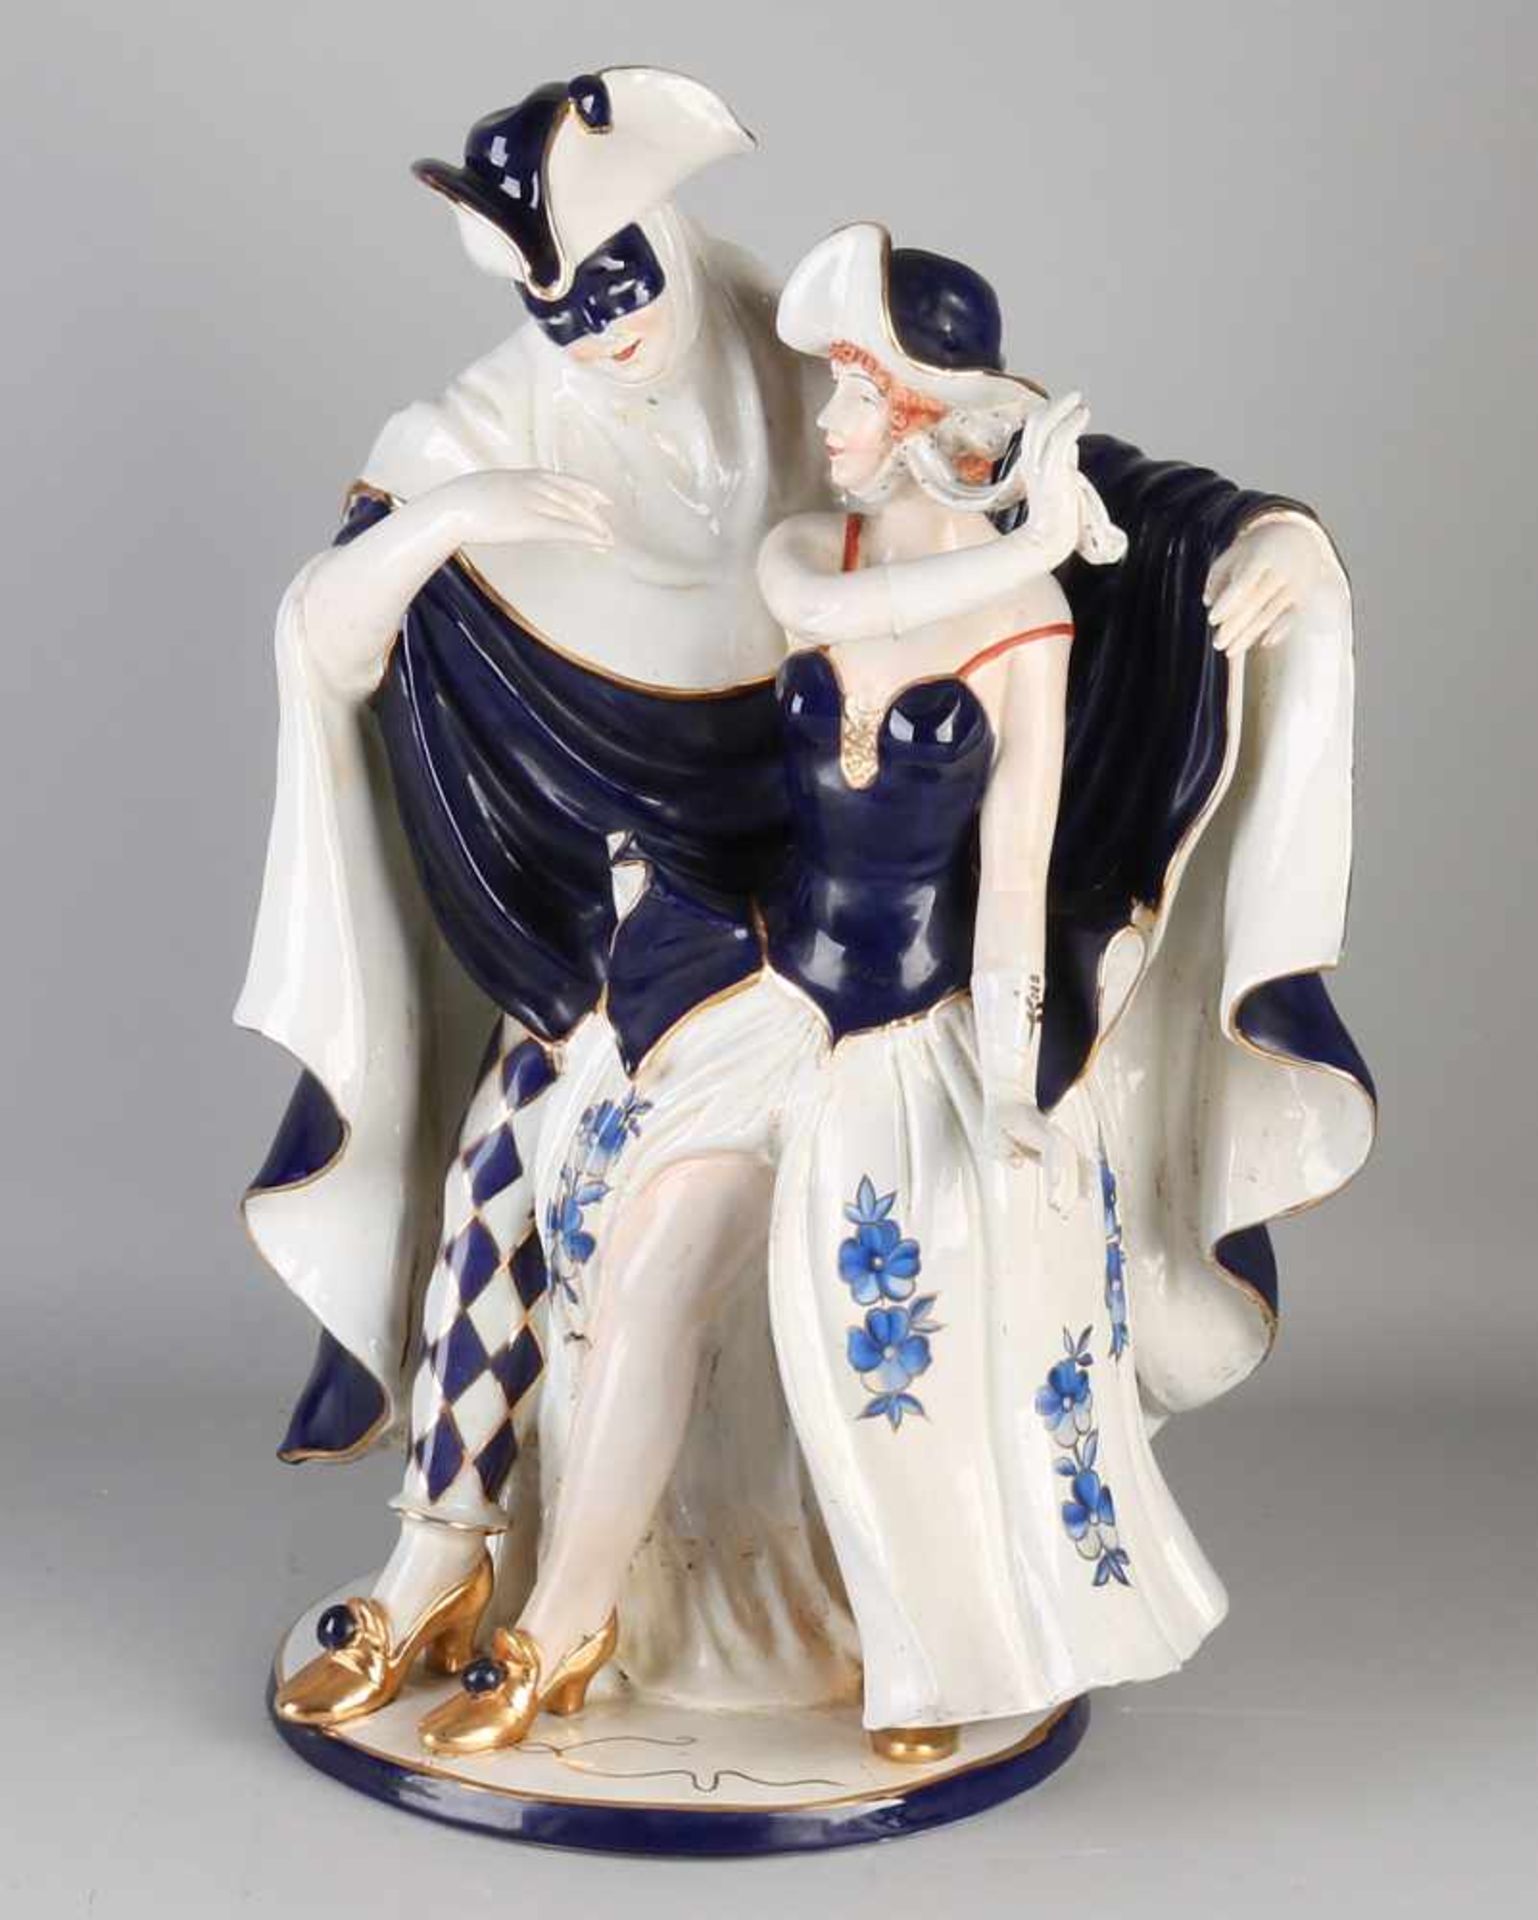 Very large French / Italian porcelain figure. 20th century. Costumed couple. Blue-white + gold